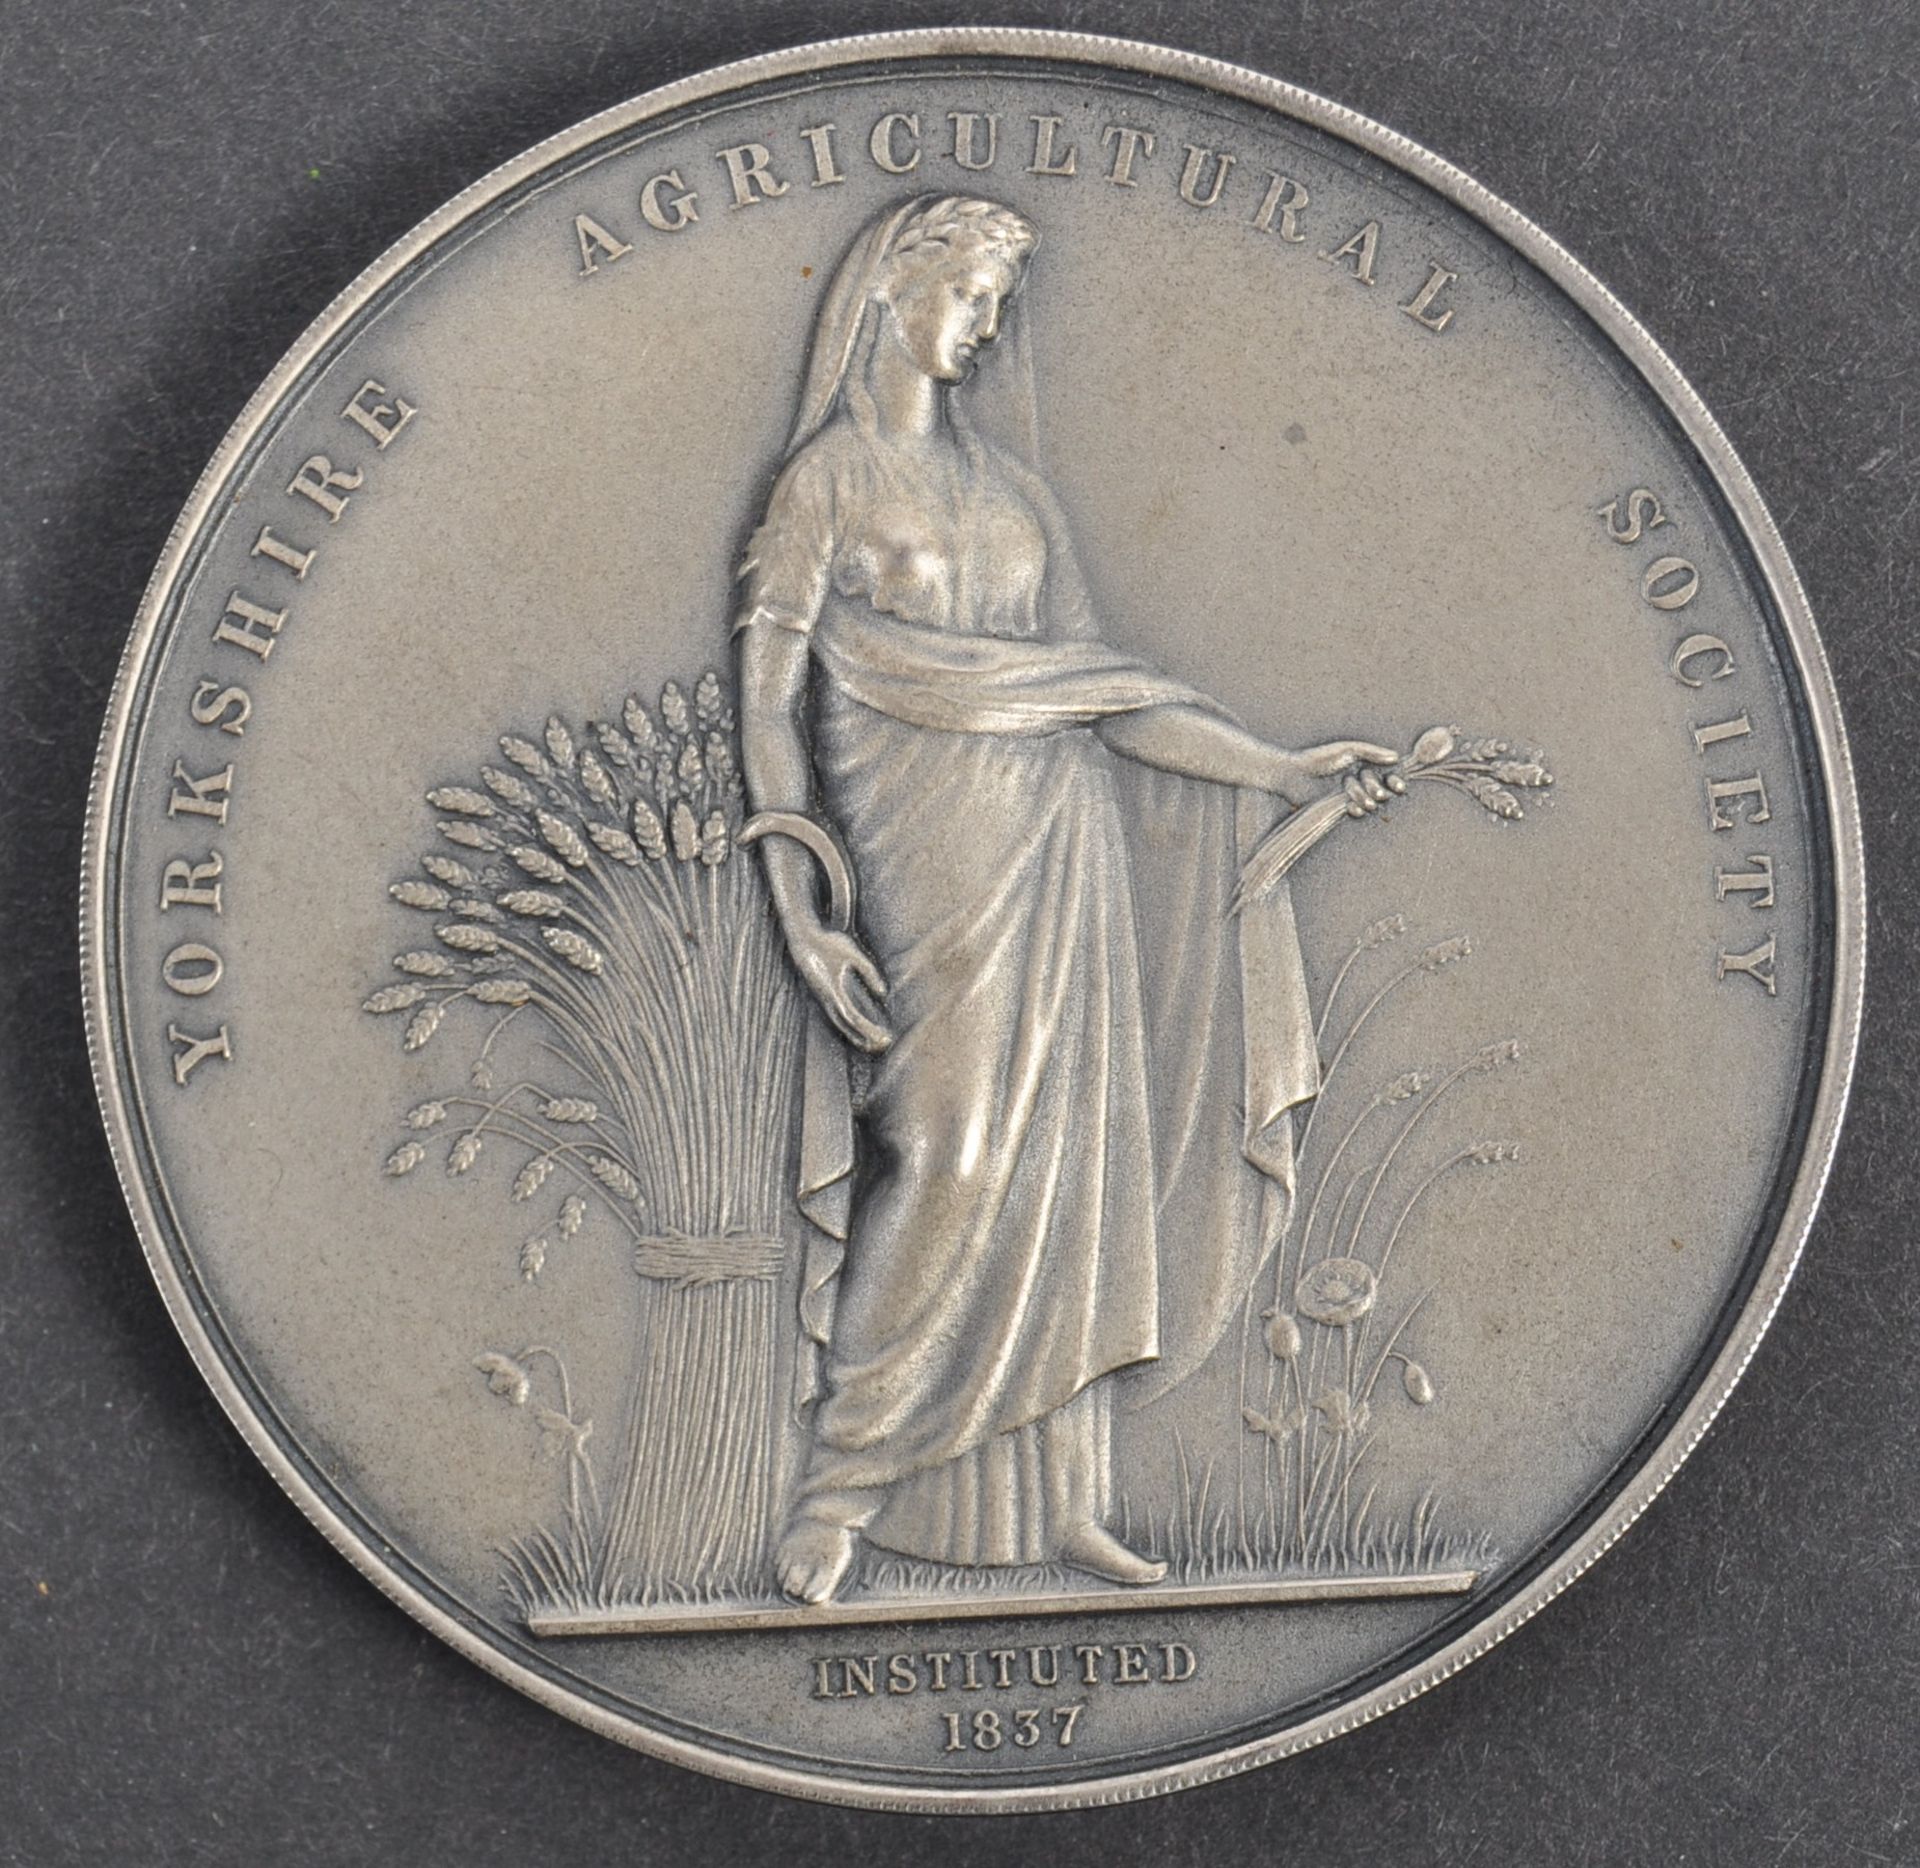 COLLECTION OF ANTIQUE MEDALLIONS – 1939 - YORKSHIRE SOCIETY